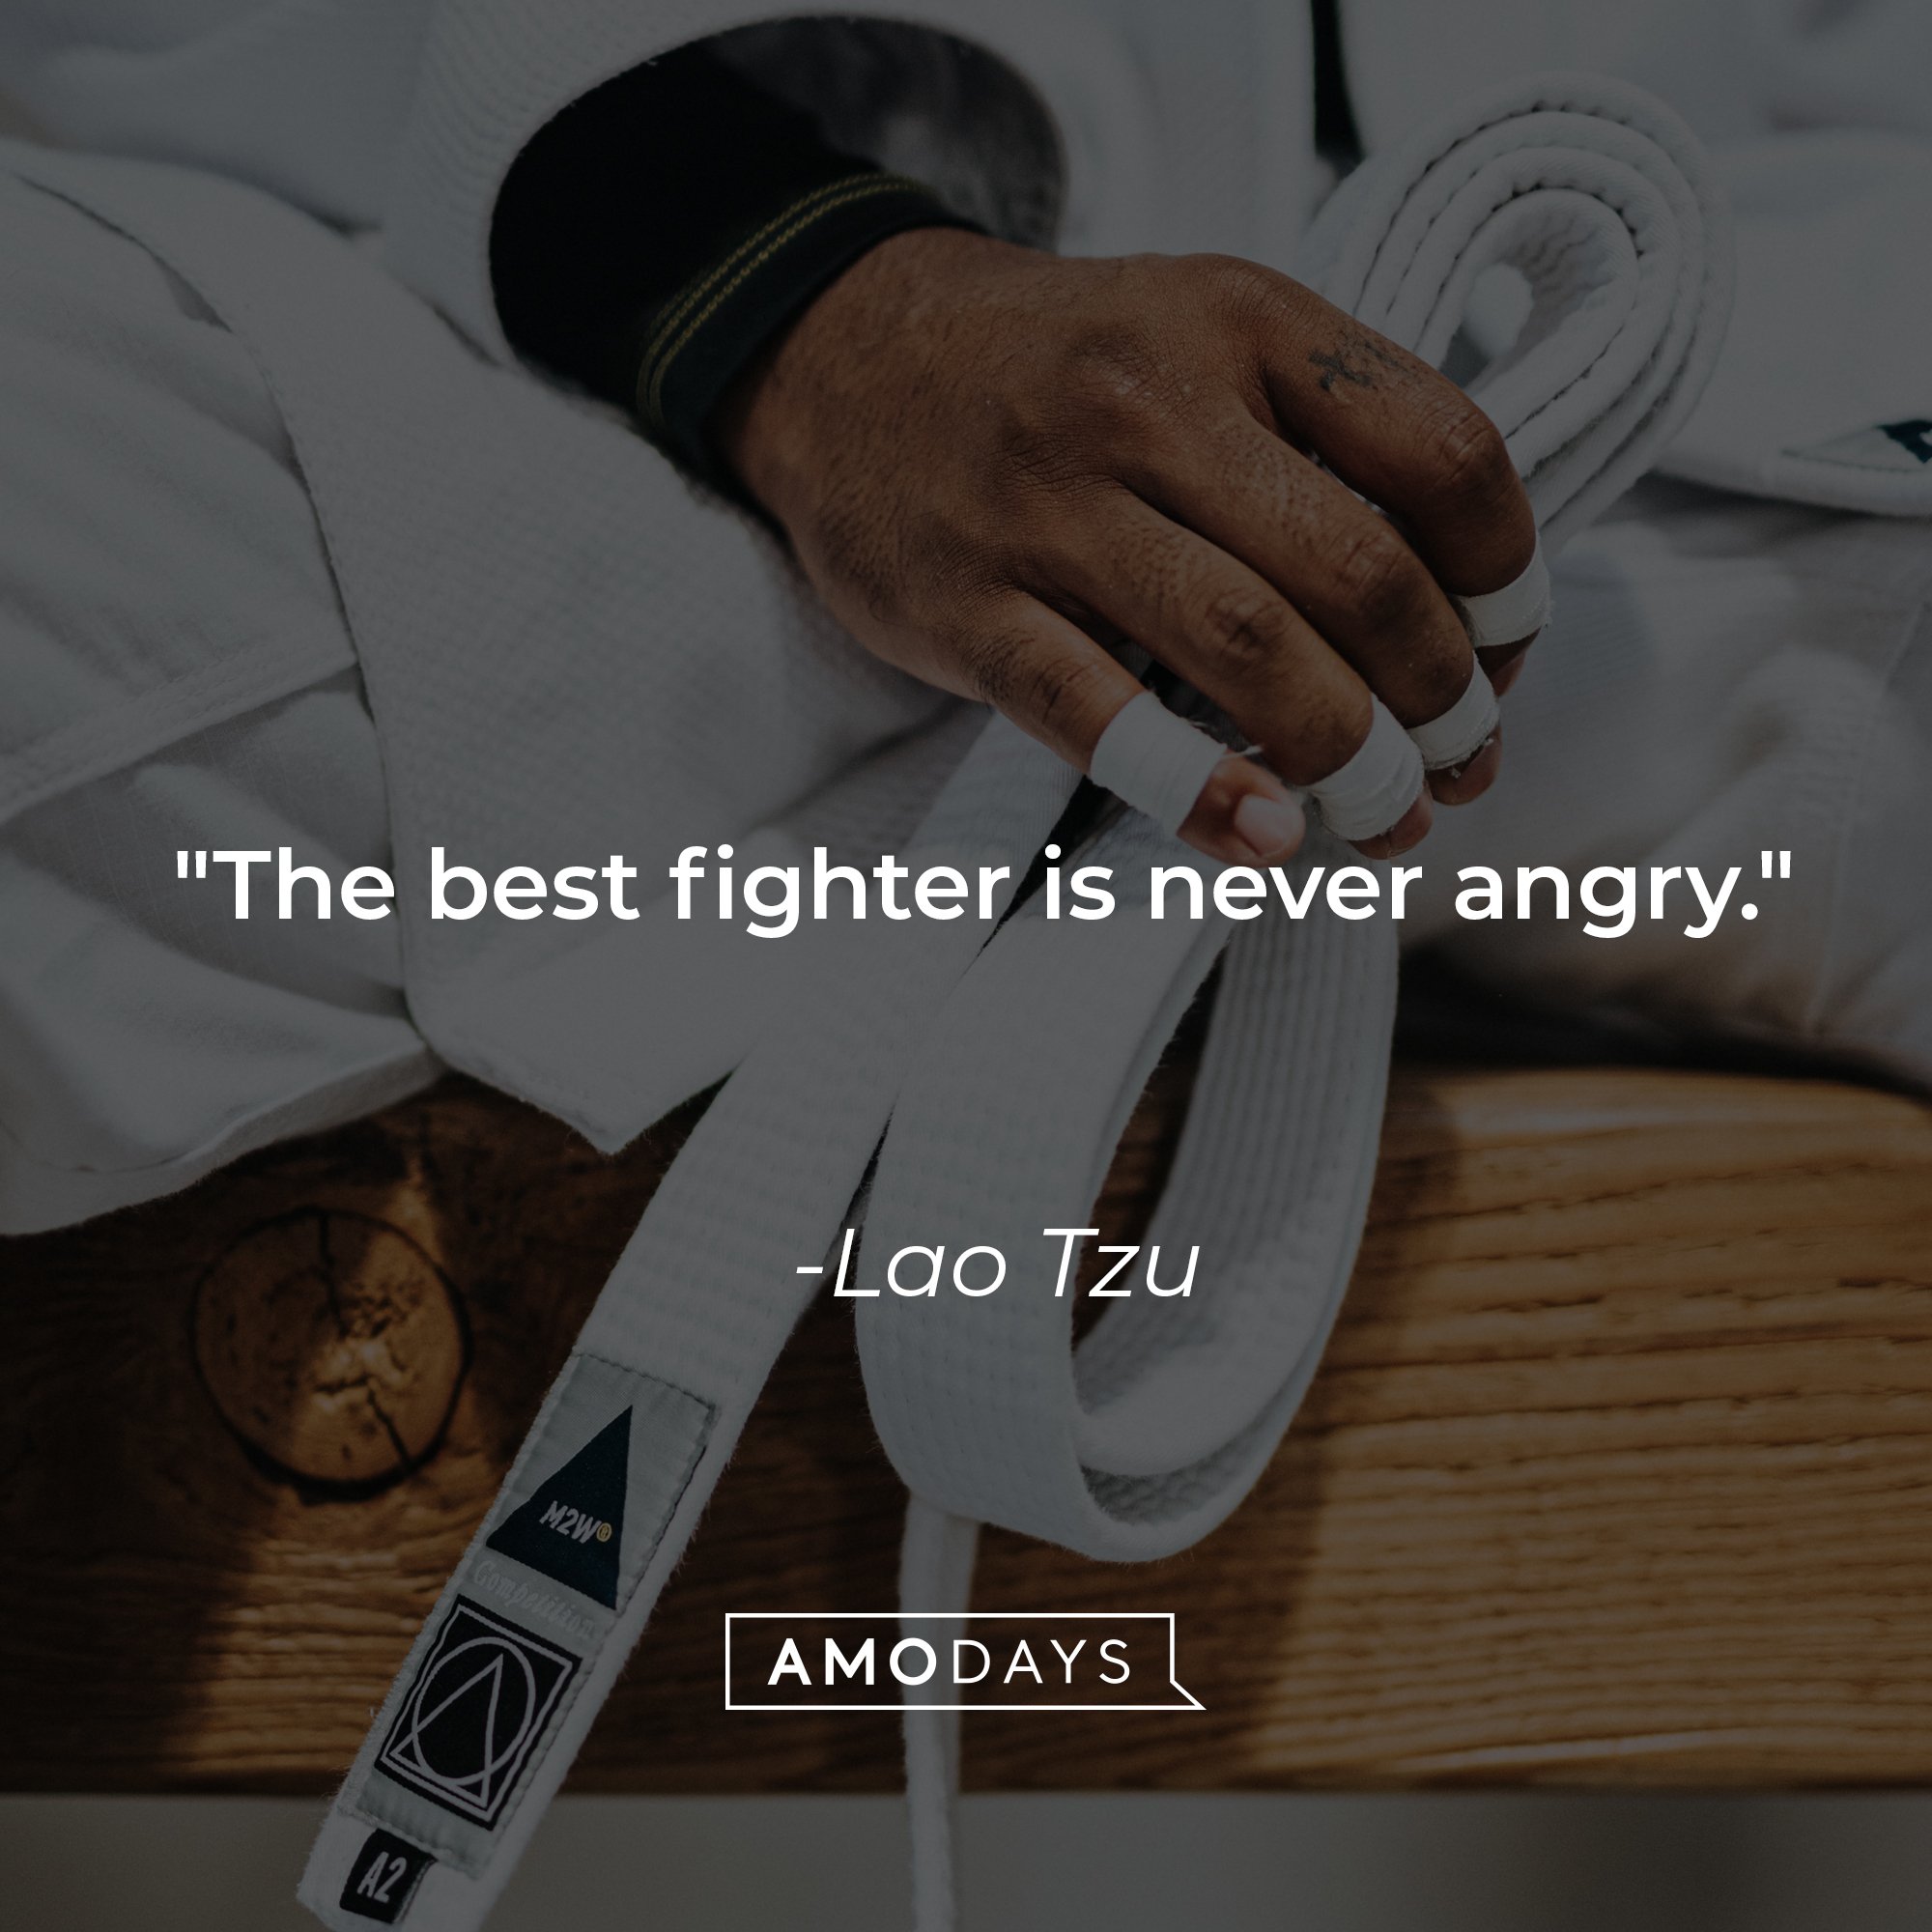 Lao Tzu quote: "The best fighter is never angry." | Image: AmoDays    